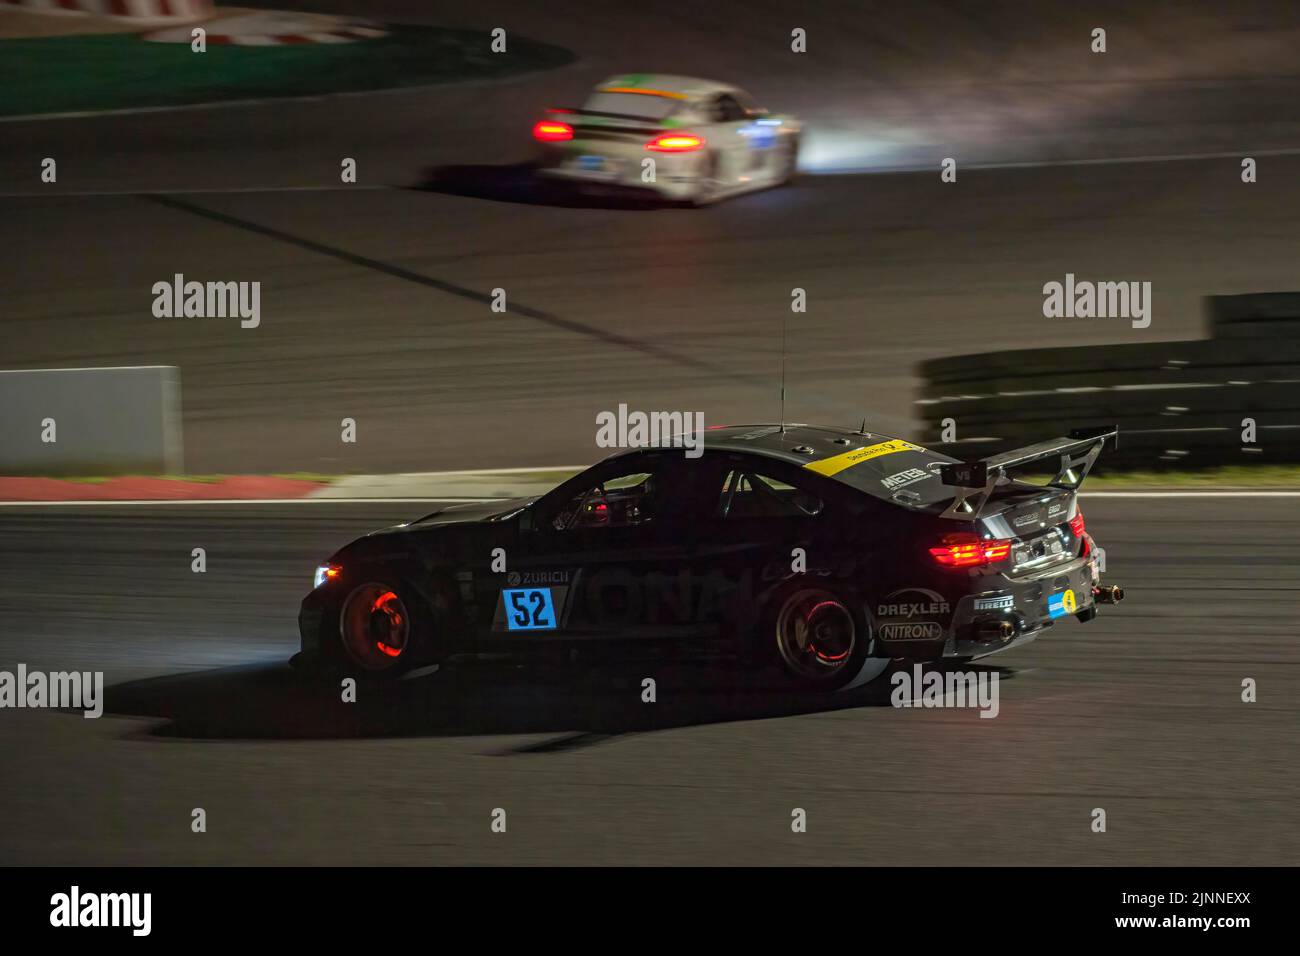 Race car BMW M4 at night during car race 24-hour race 24h race on Grand Prix track of Nuerburgring race track with glowing brake discs, Nuerburgring Stock Photo